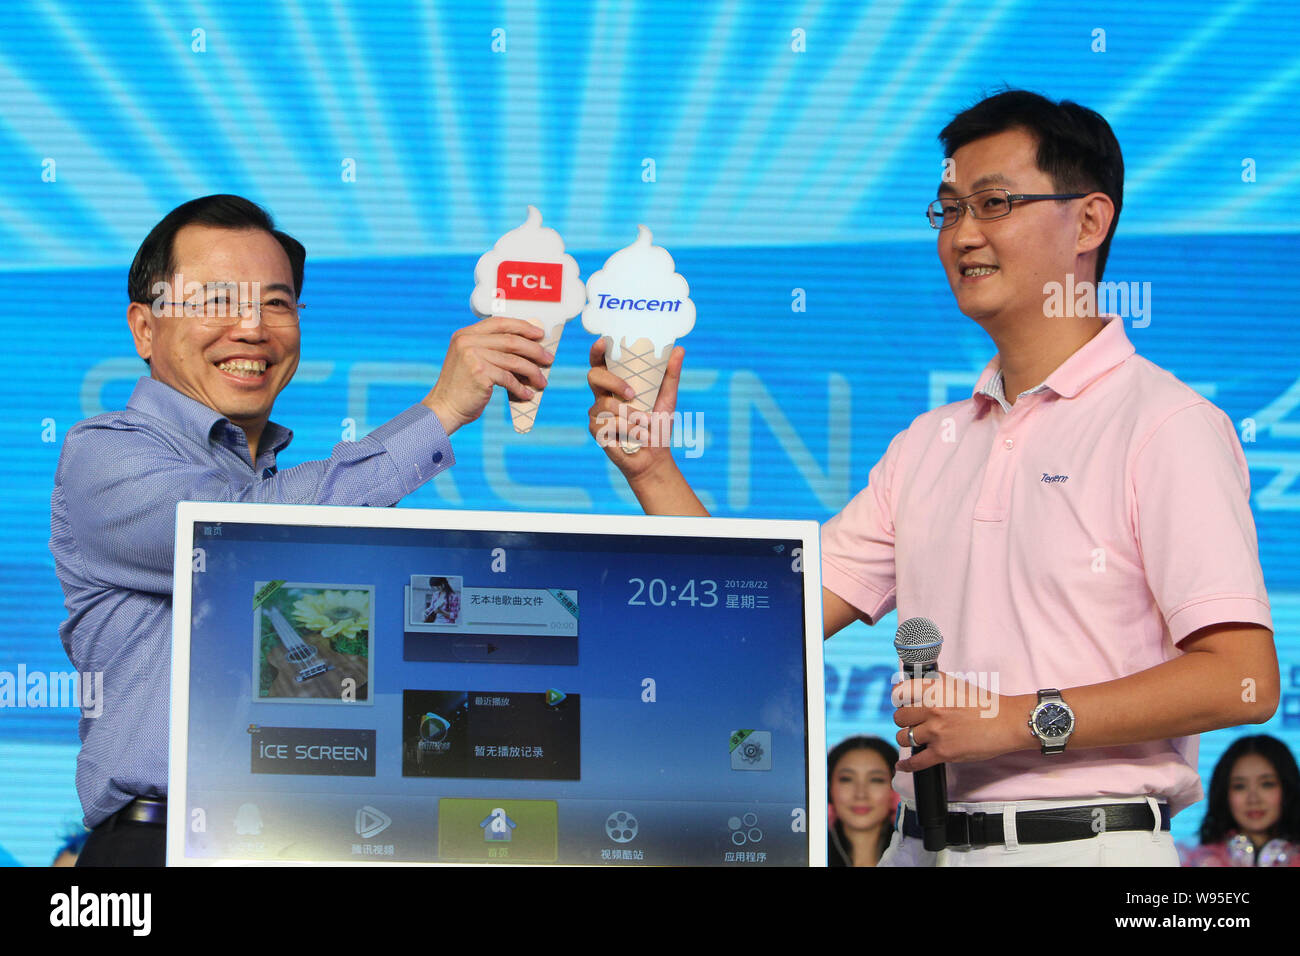 Pony Ma (Ma Huateng), right, Chairman and CEO of Tencent, and Li Dongsheng, left, Chairman of TCL, pose at a launch ceremony for the TCL smart TV, iCE Stock Photo